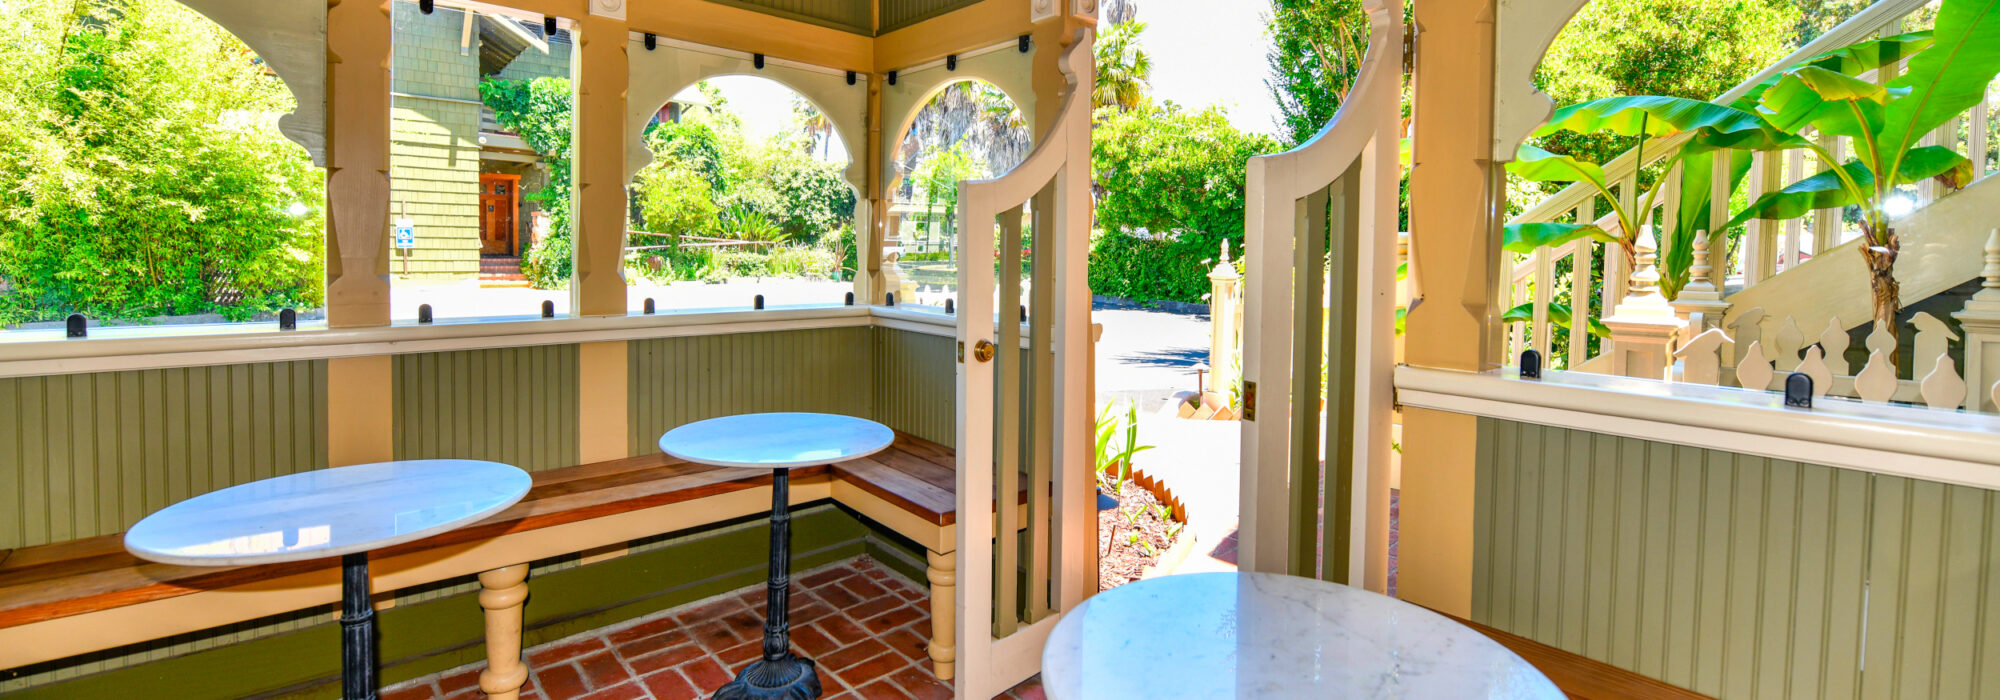 Interior of gazebo. Floor is red brick pavers, walls are Victorian styled wainscoting with arched openings pain colors are green, yellow and cream. 3 marble topped tables are in front of built-in wooden benches. Outside windows are plantings and bananas.